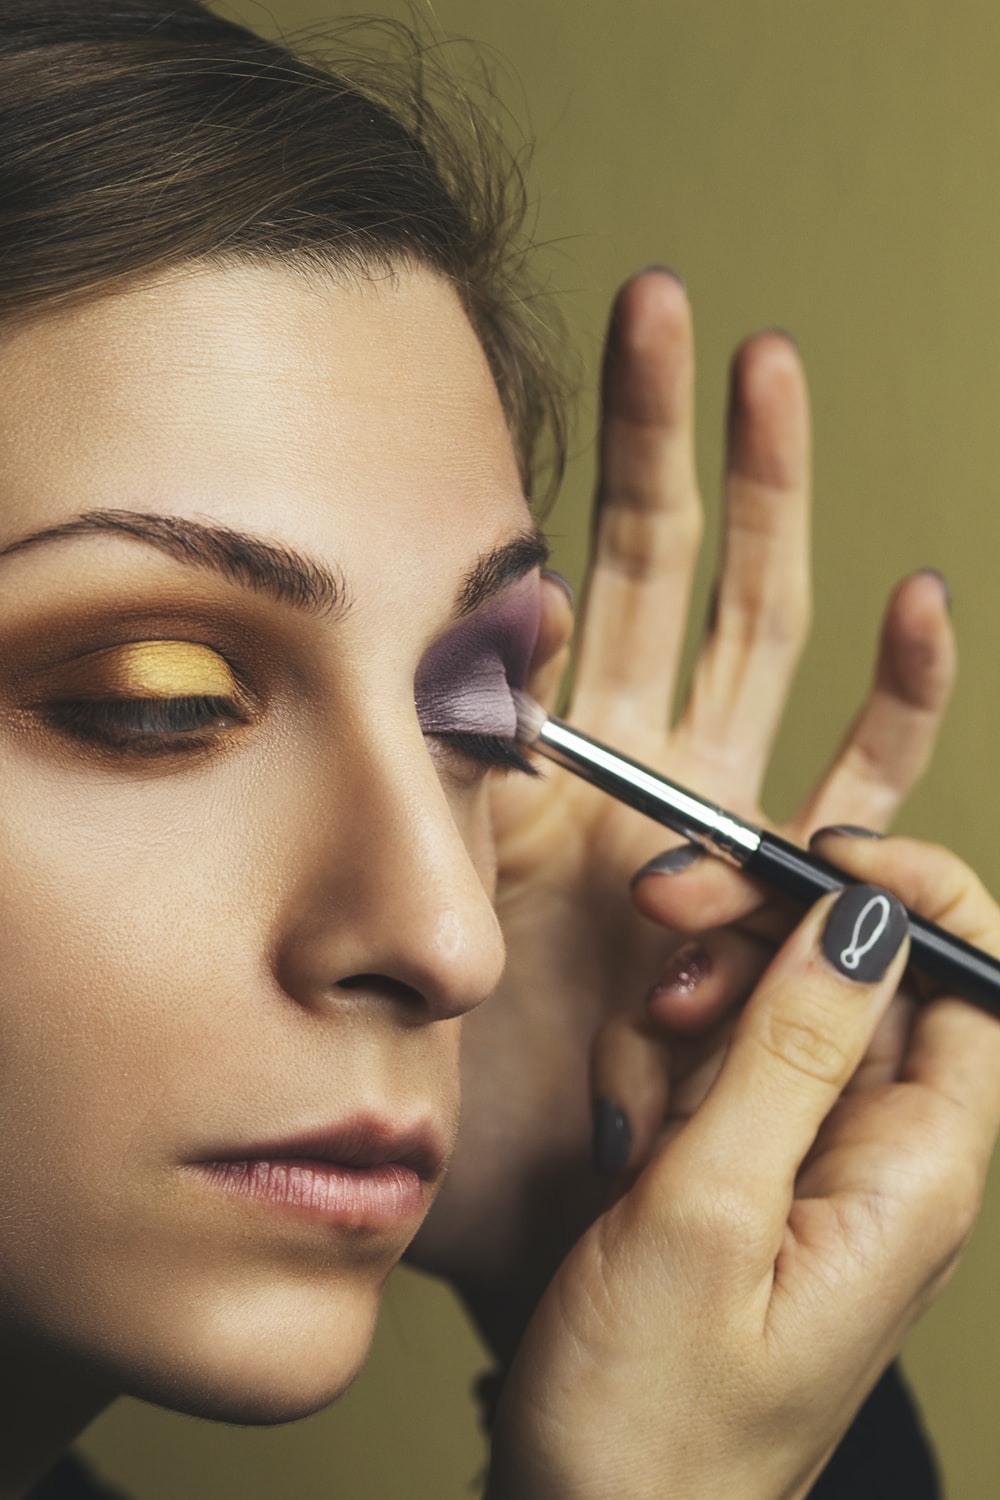 Contrasting shades outdated makeup trend